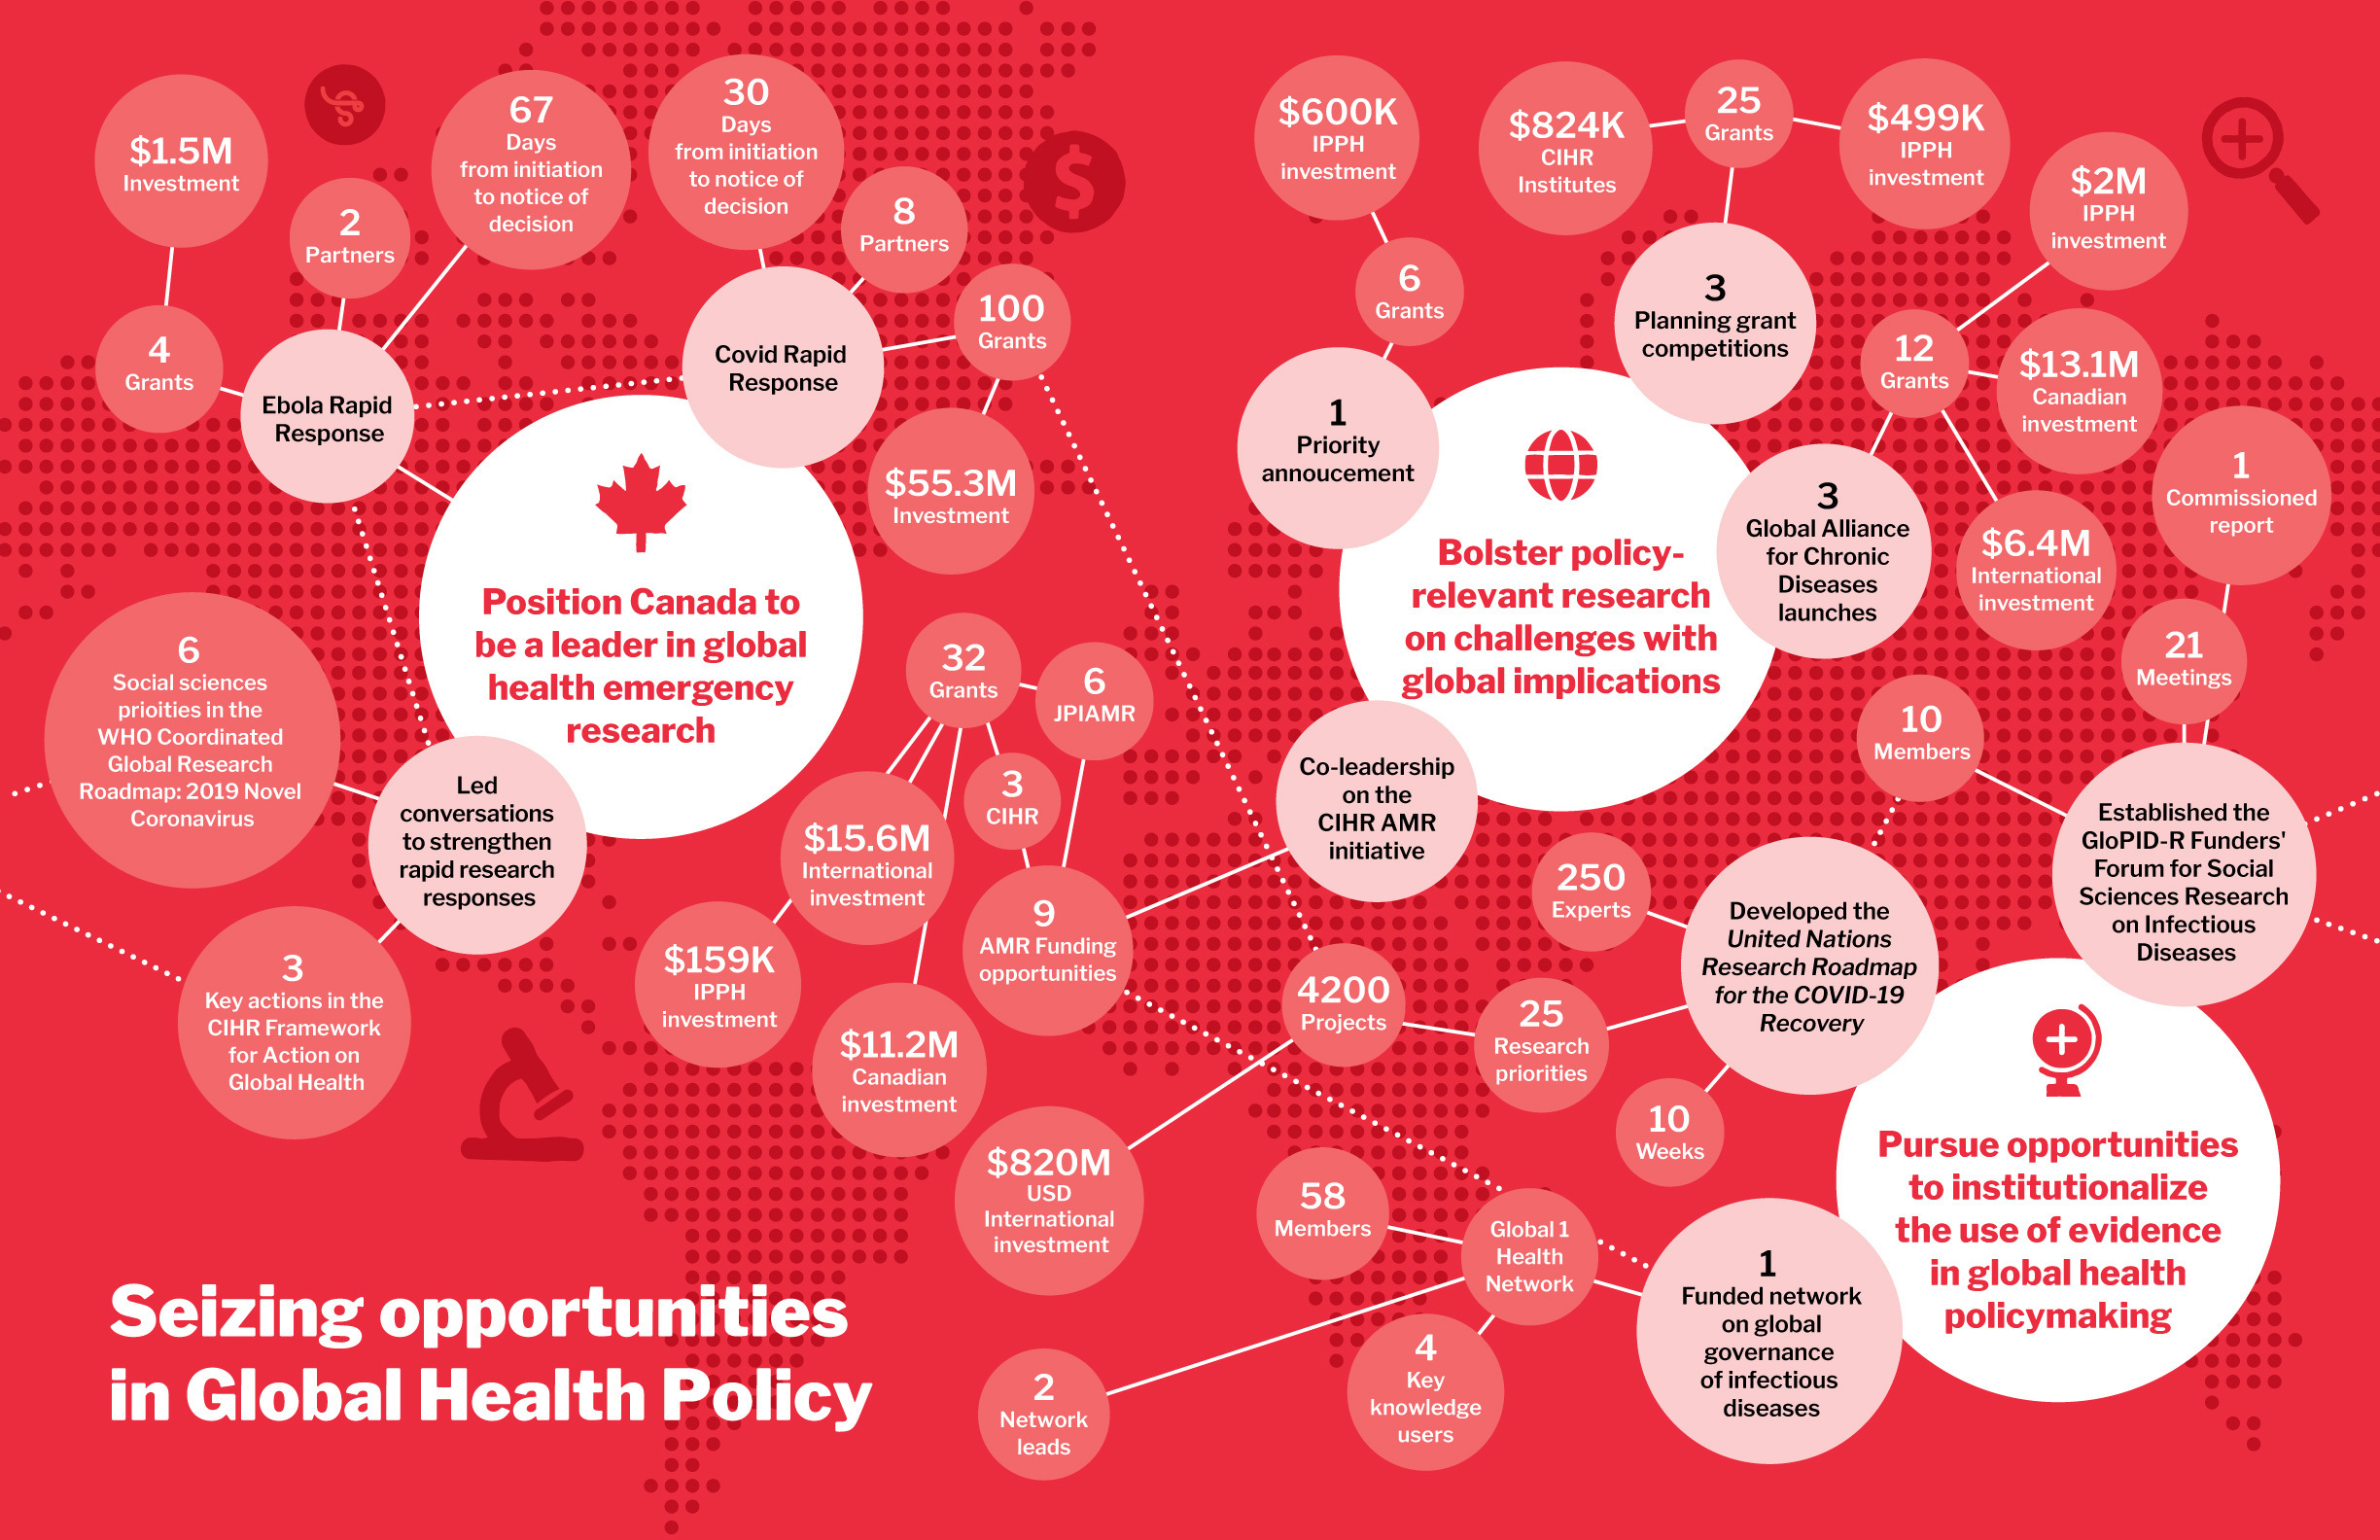 Seizing opportunities in Global Health Policy